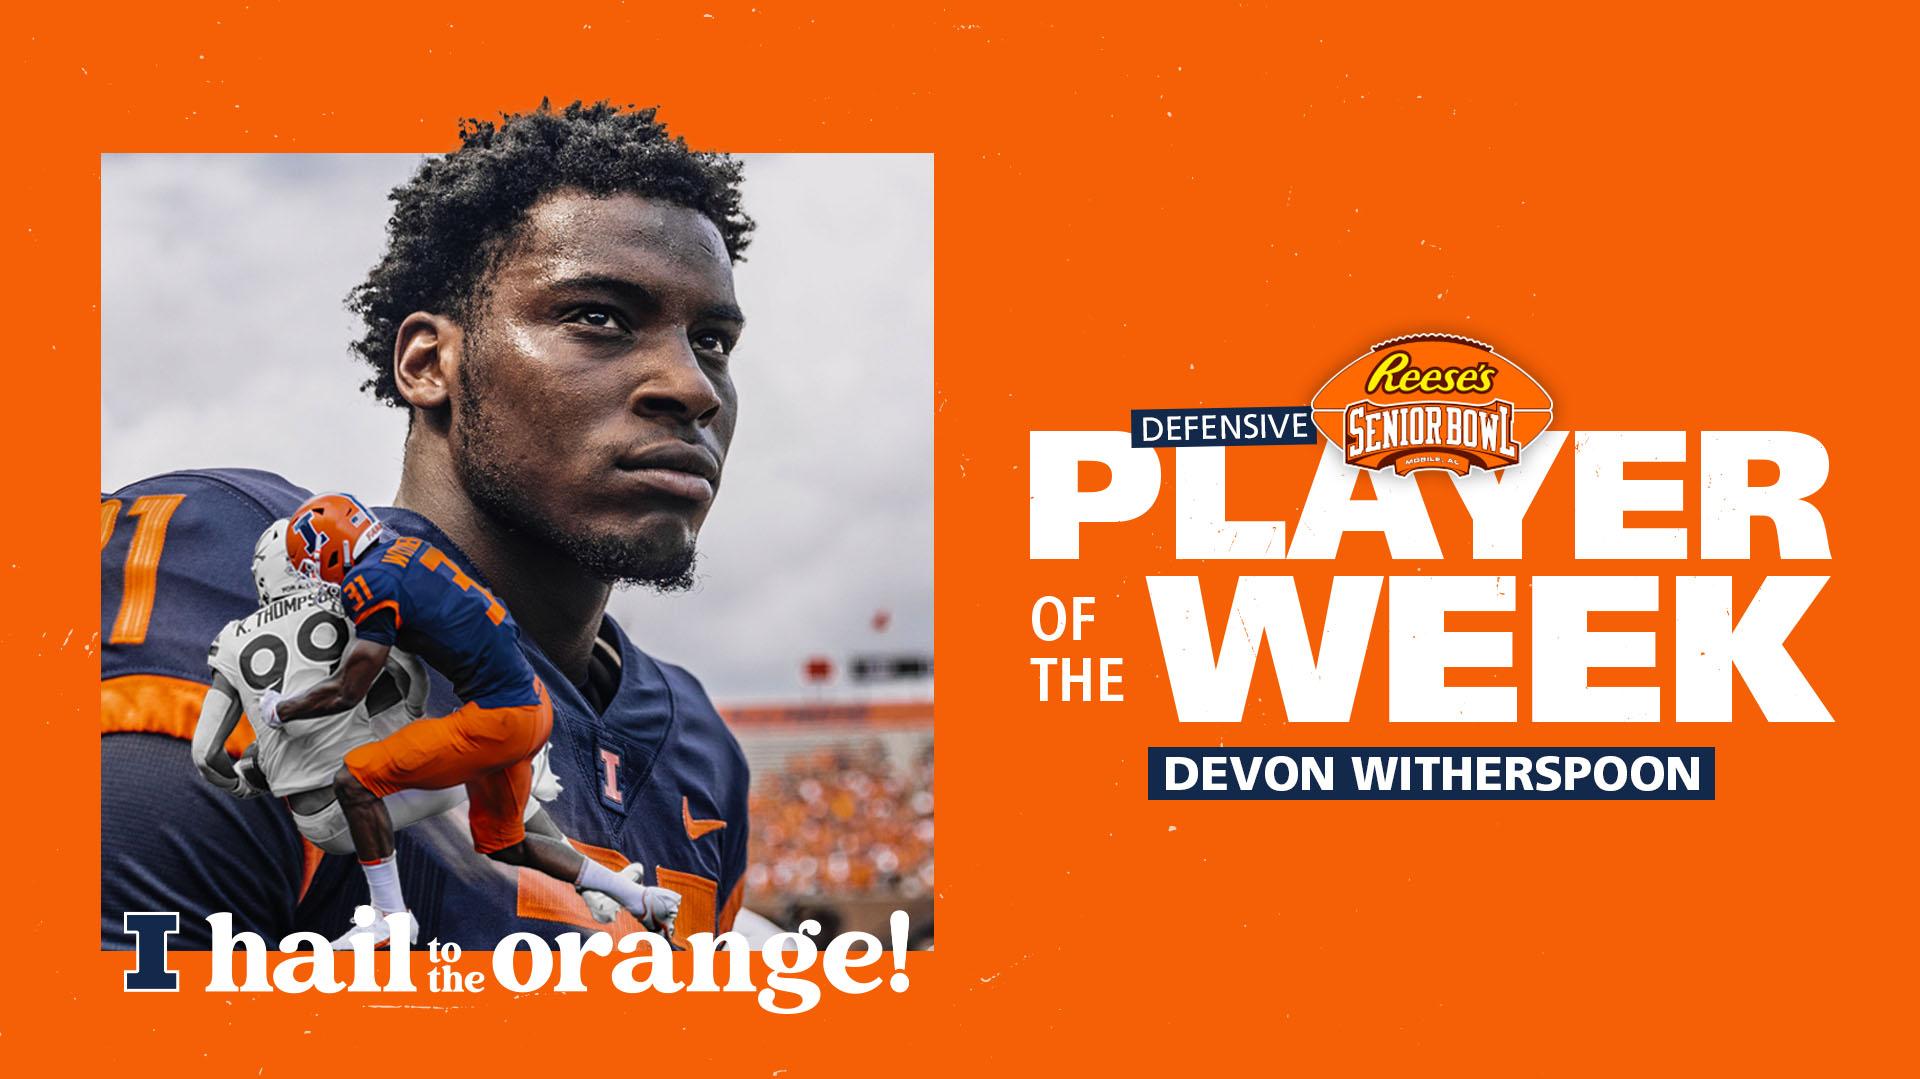 Witherspoon Earns Senior Bowl Player of the Week Award